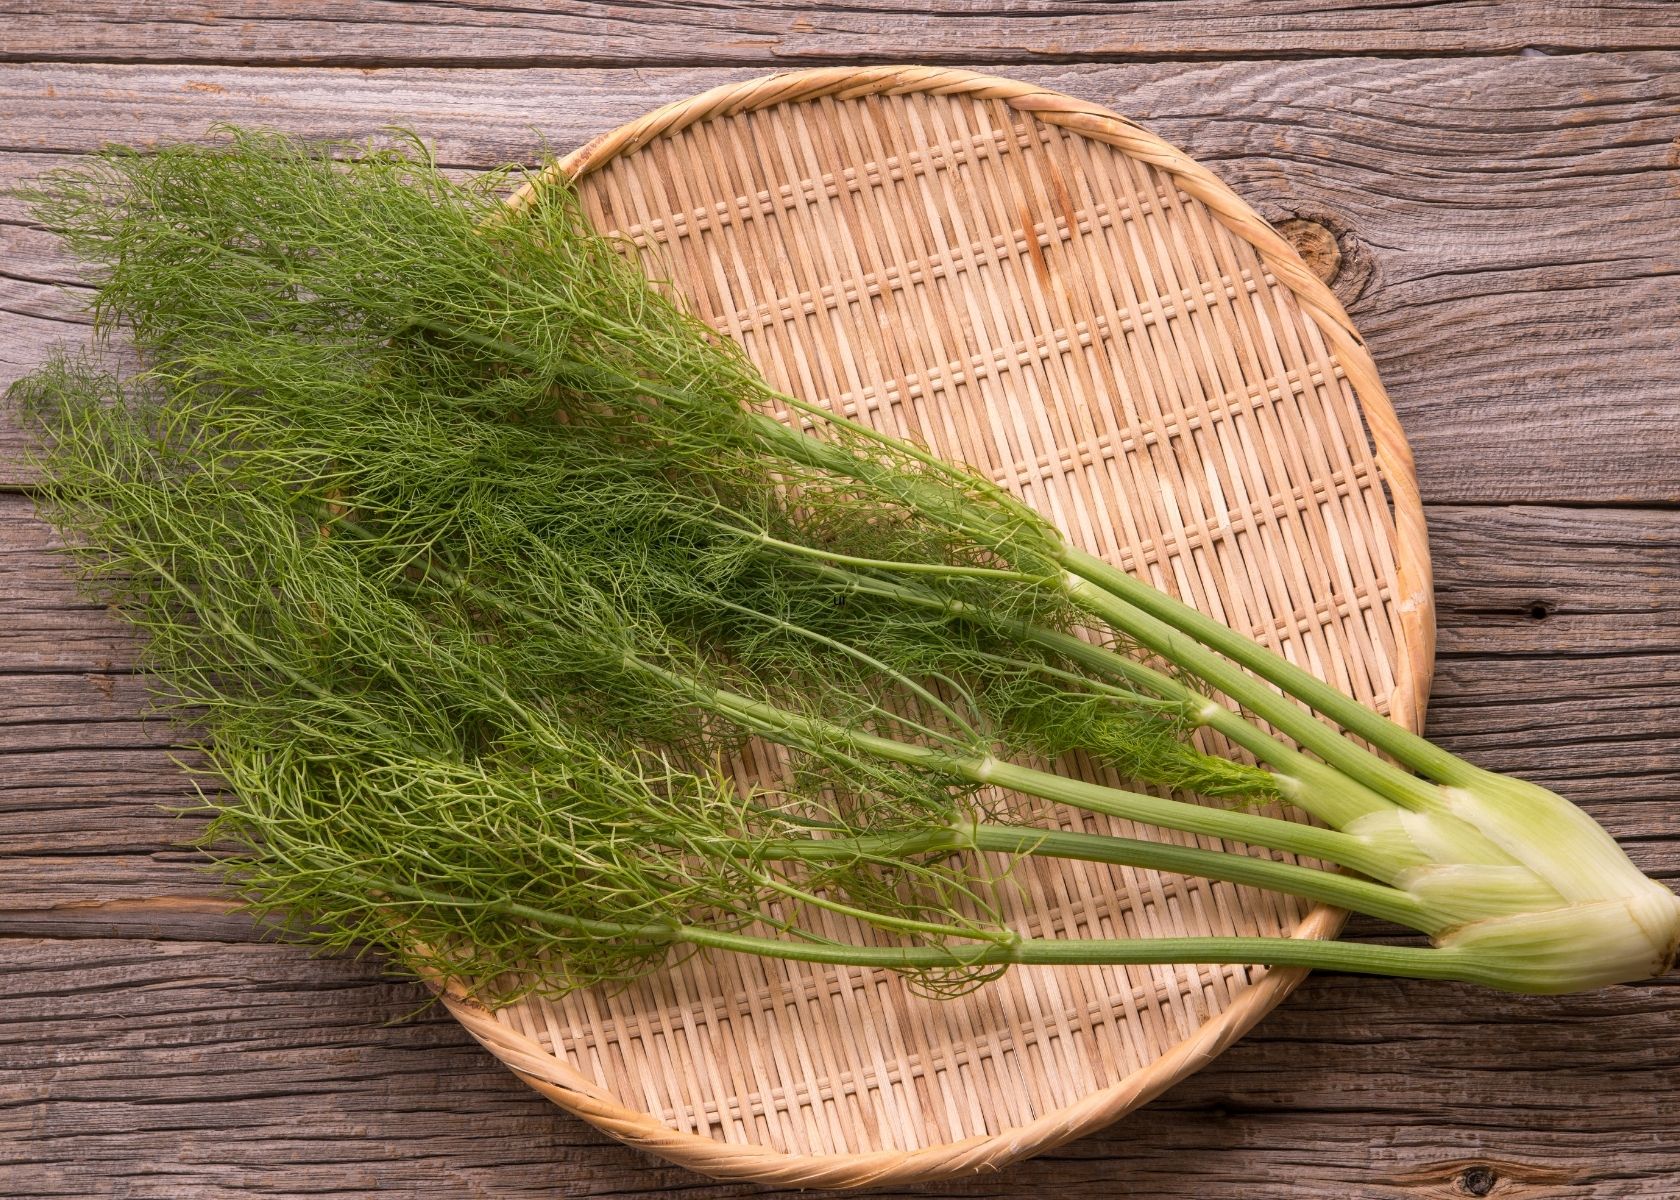 Fennel bulb with long stems and fronds on round woven wood placemat.